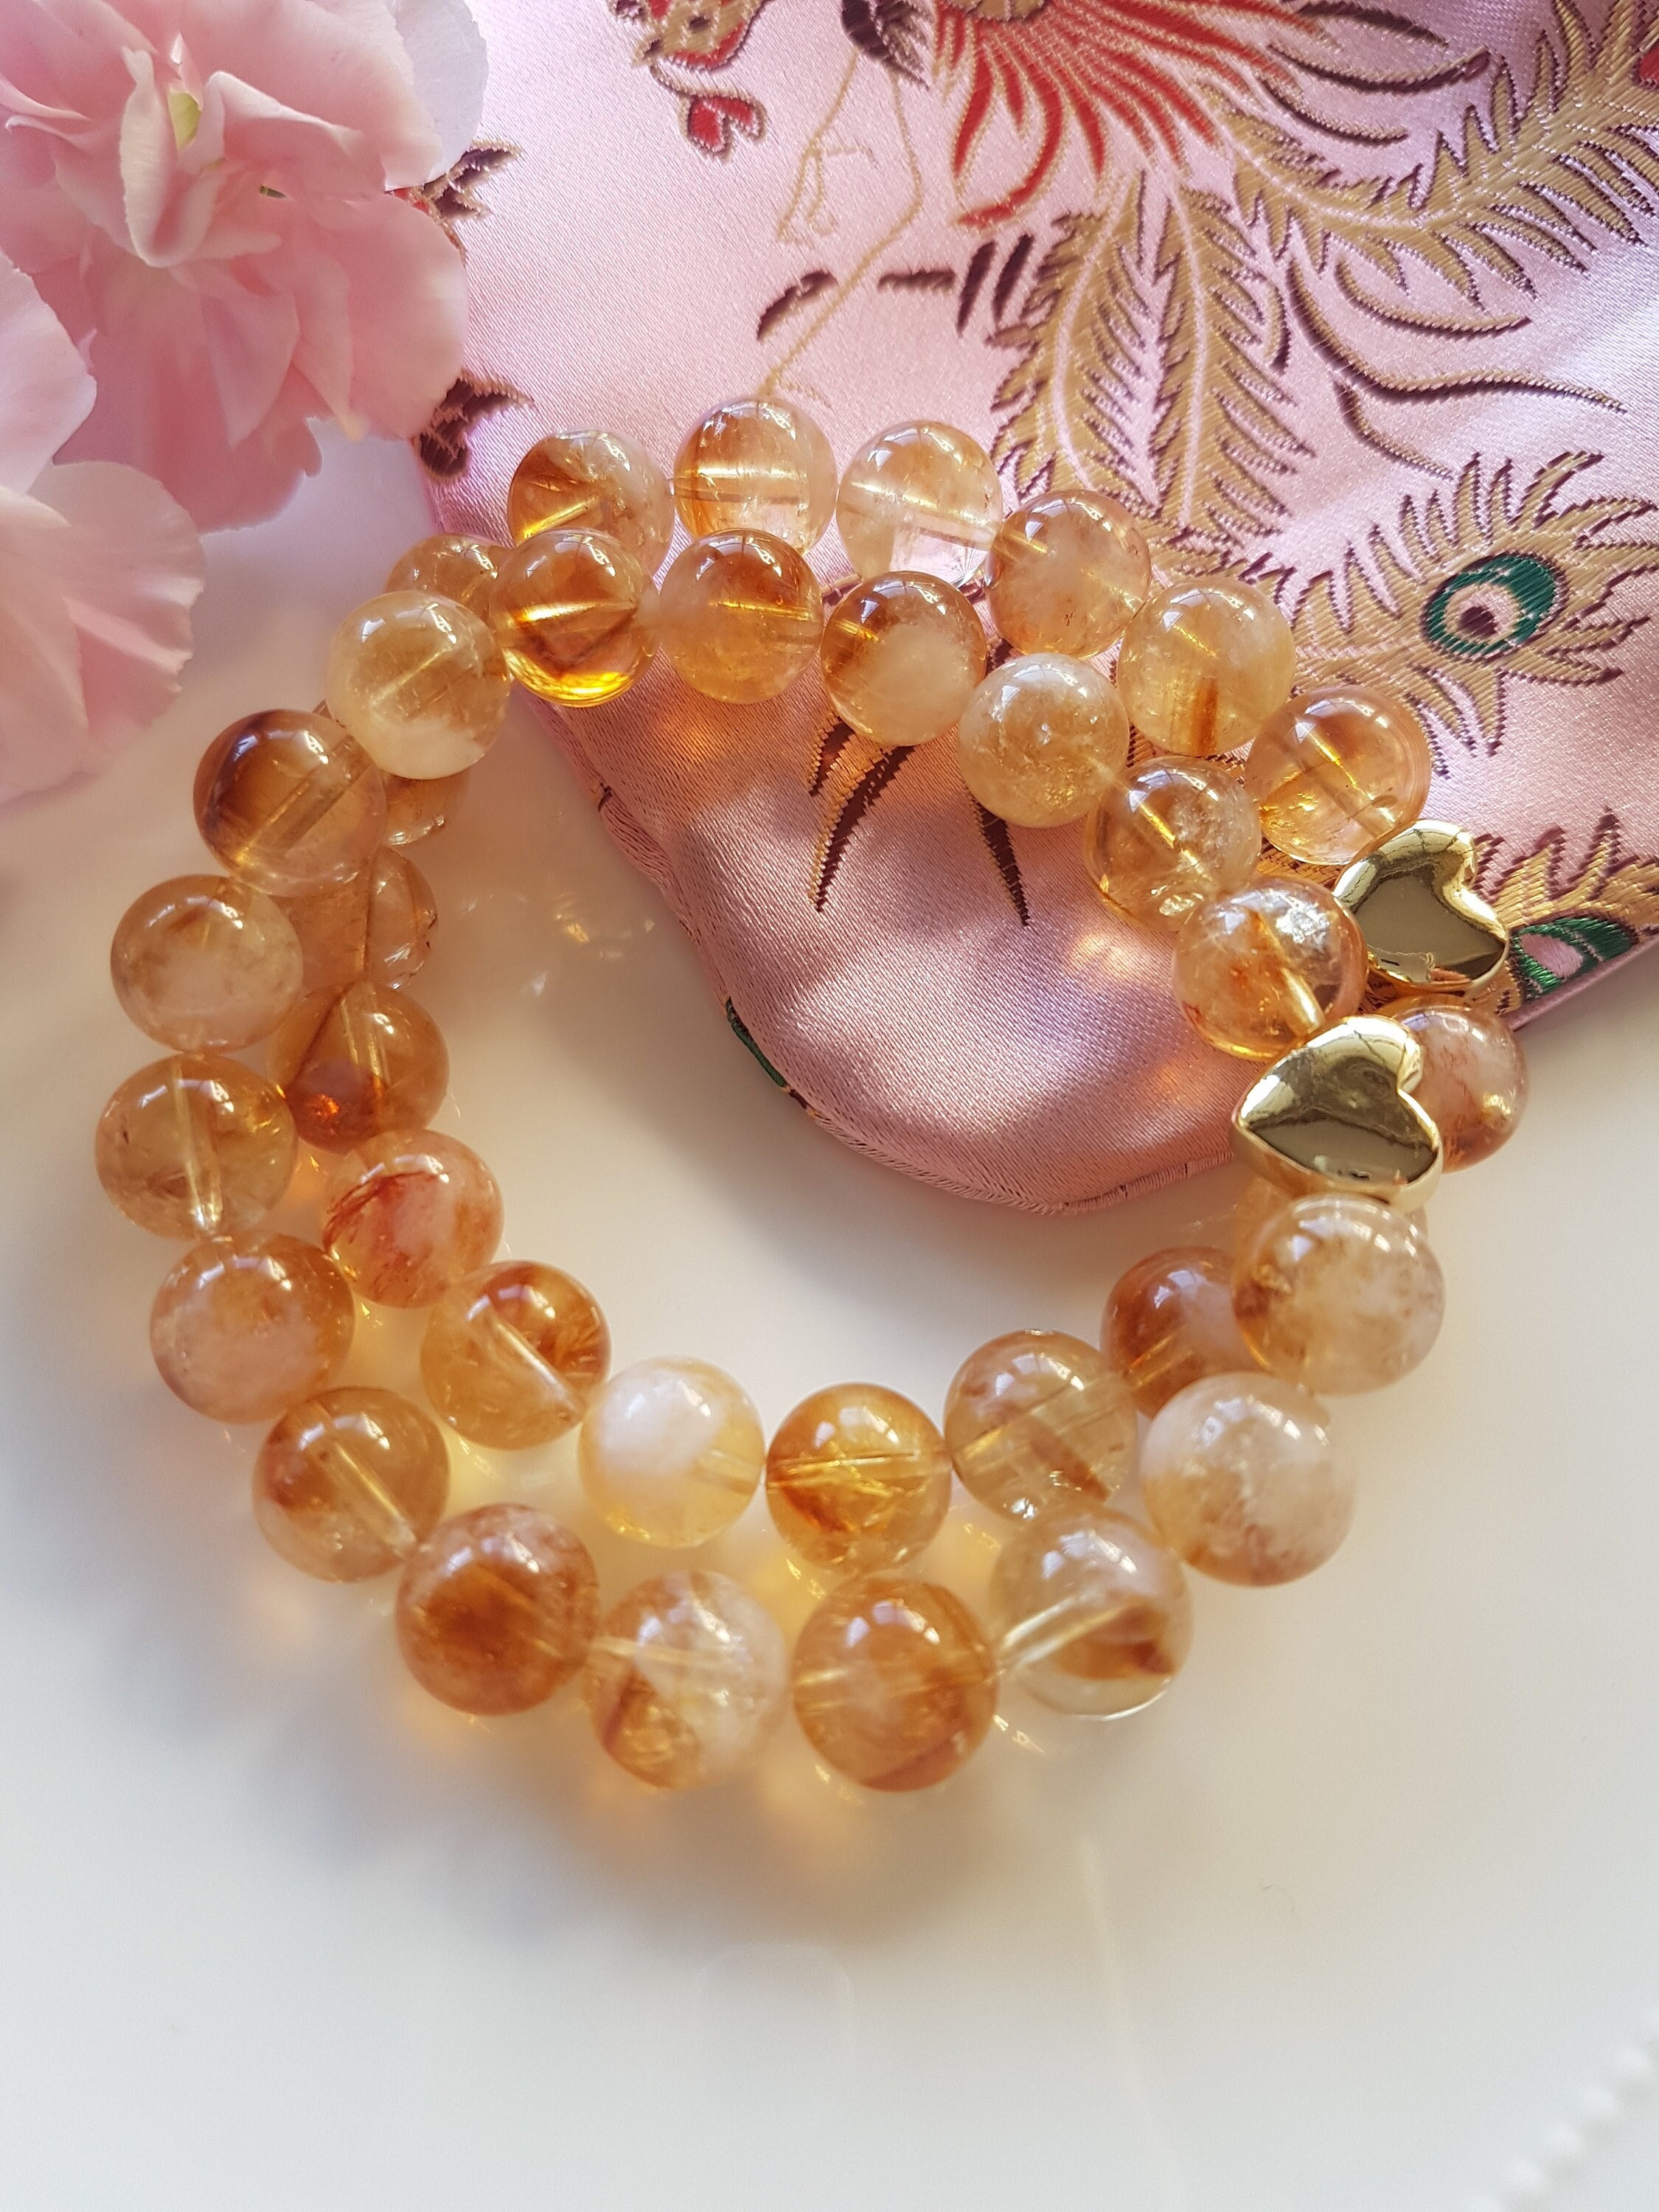 Morganite Bracelet 1 4mm, 6mm, 8mm, 10mm or 12mm Beads Love, Compassion,  Release of Old Pains/sorrows, Peace, Joy & Inner Strength 